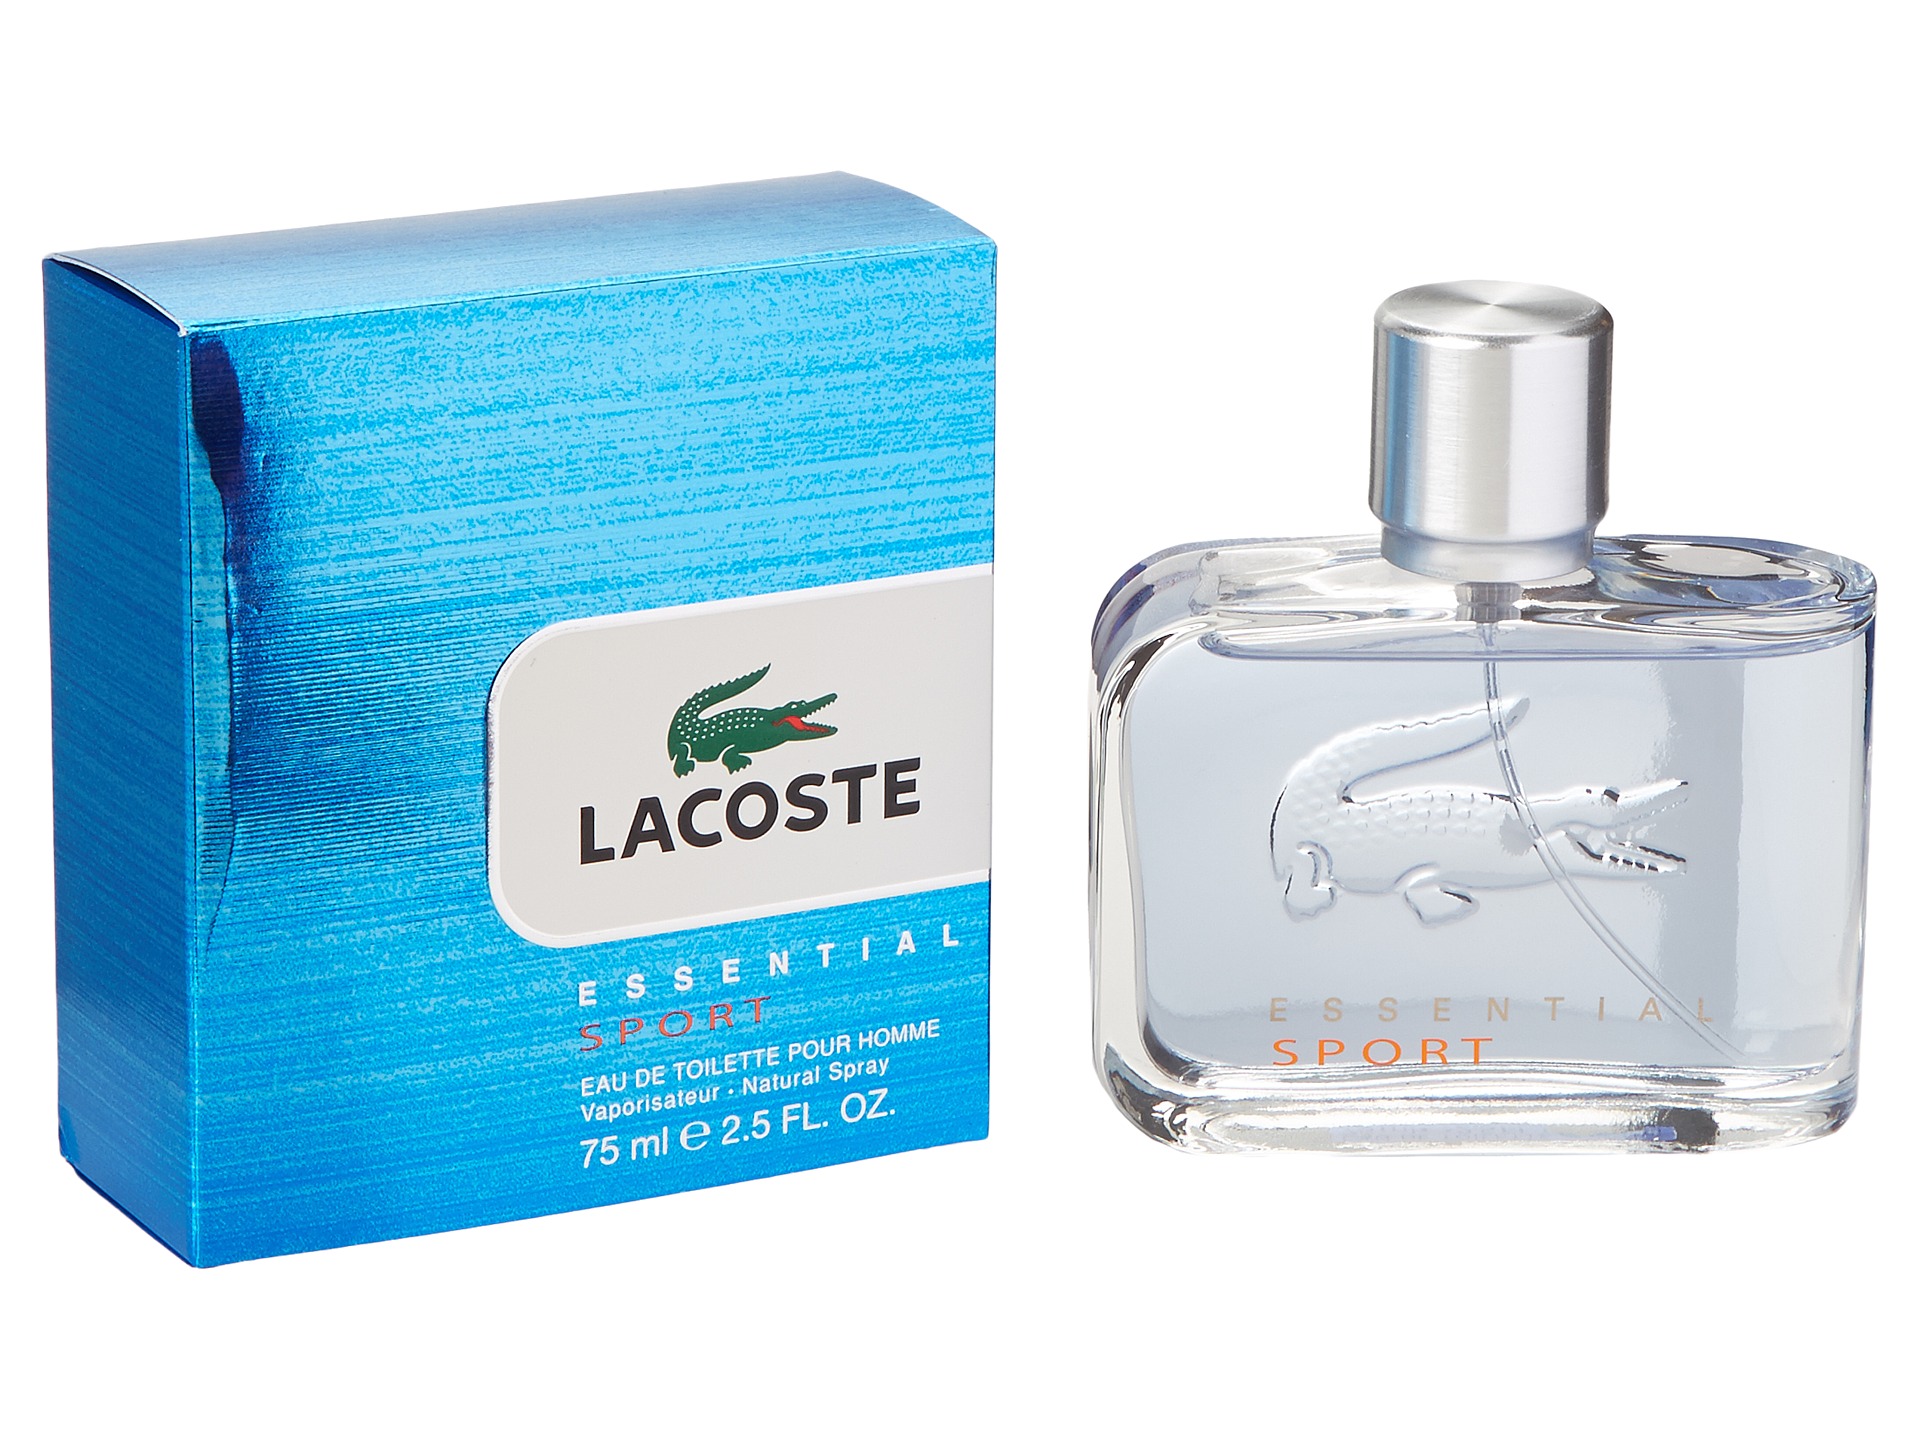 Lacoste Lacoste Essential Sport 2 5 Oz Edt Spray | Shipped Free at Zappos